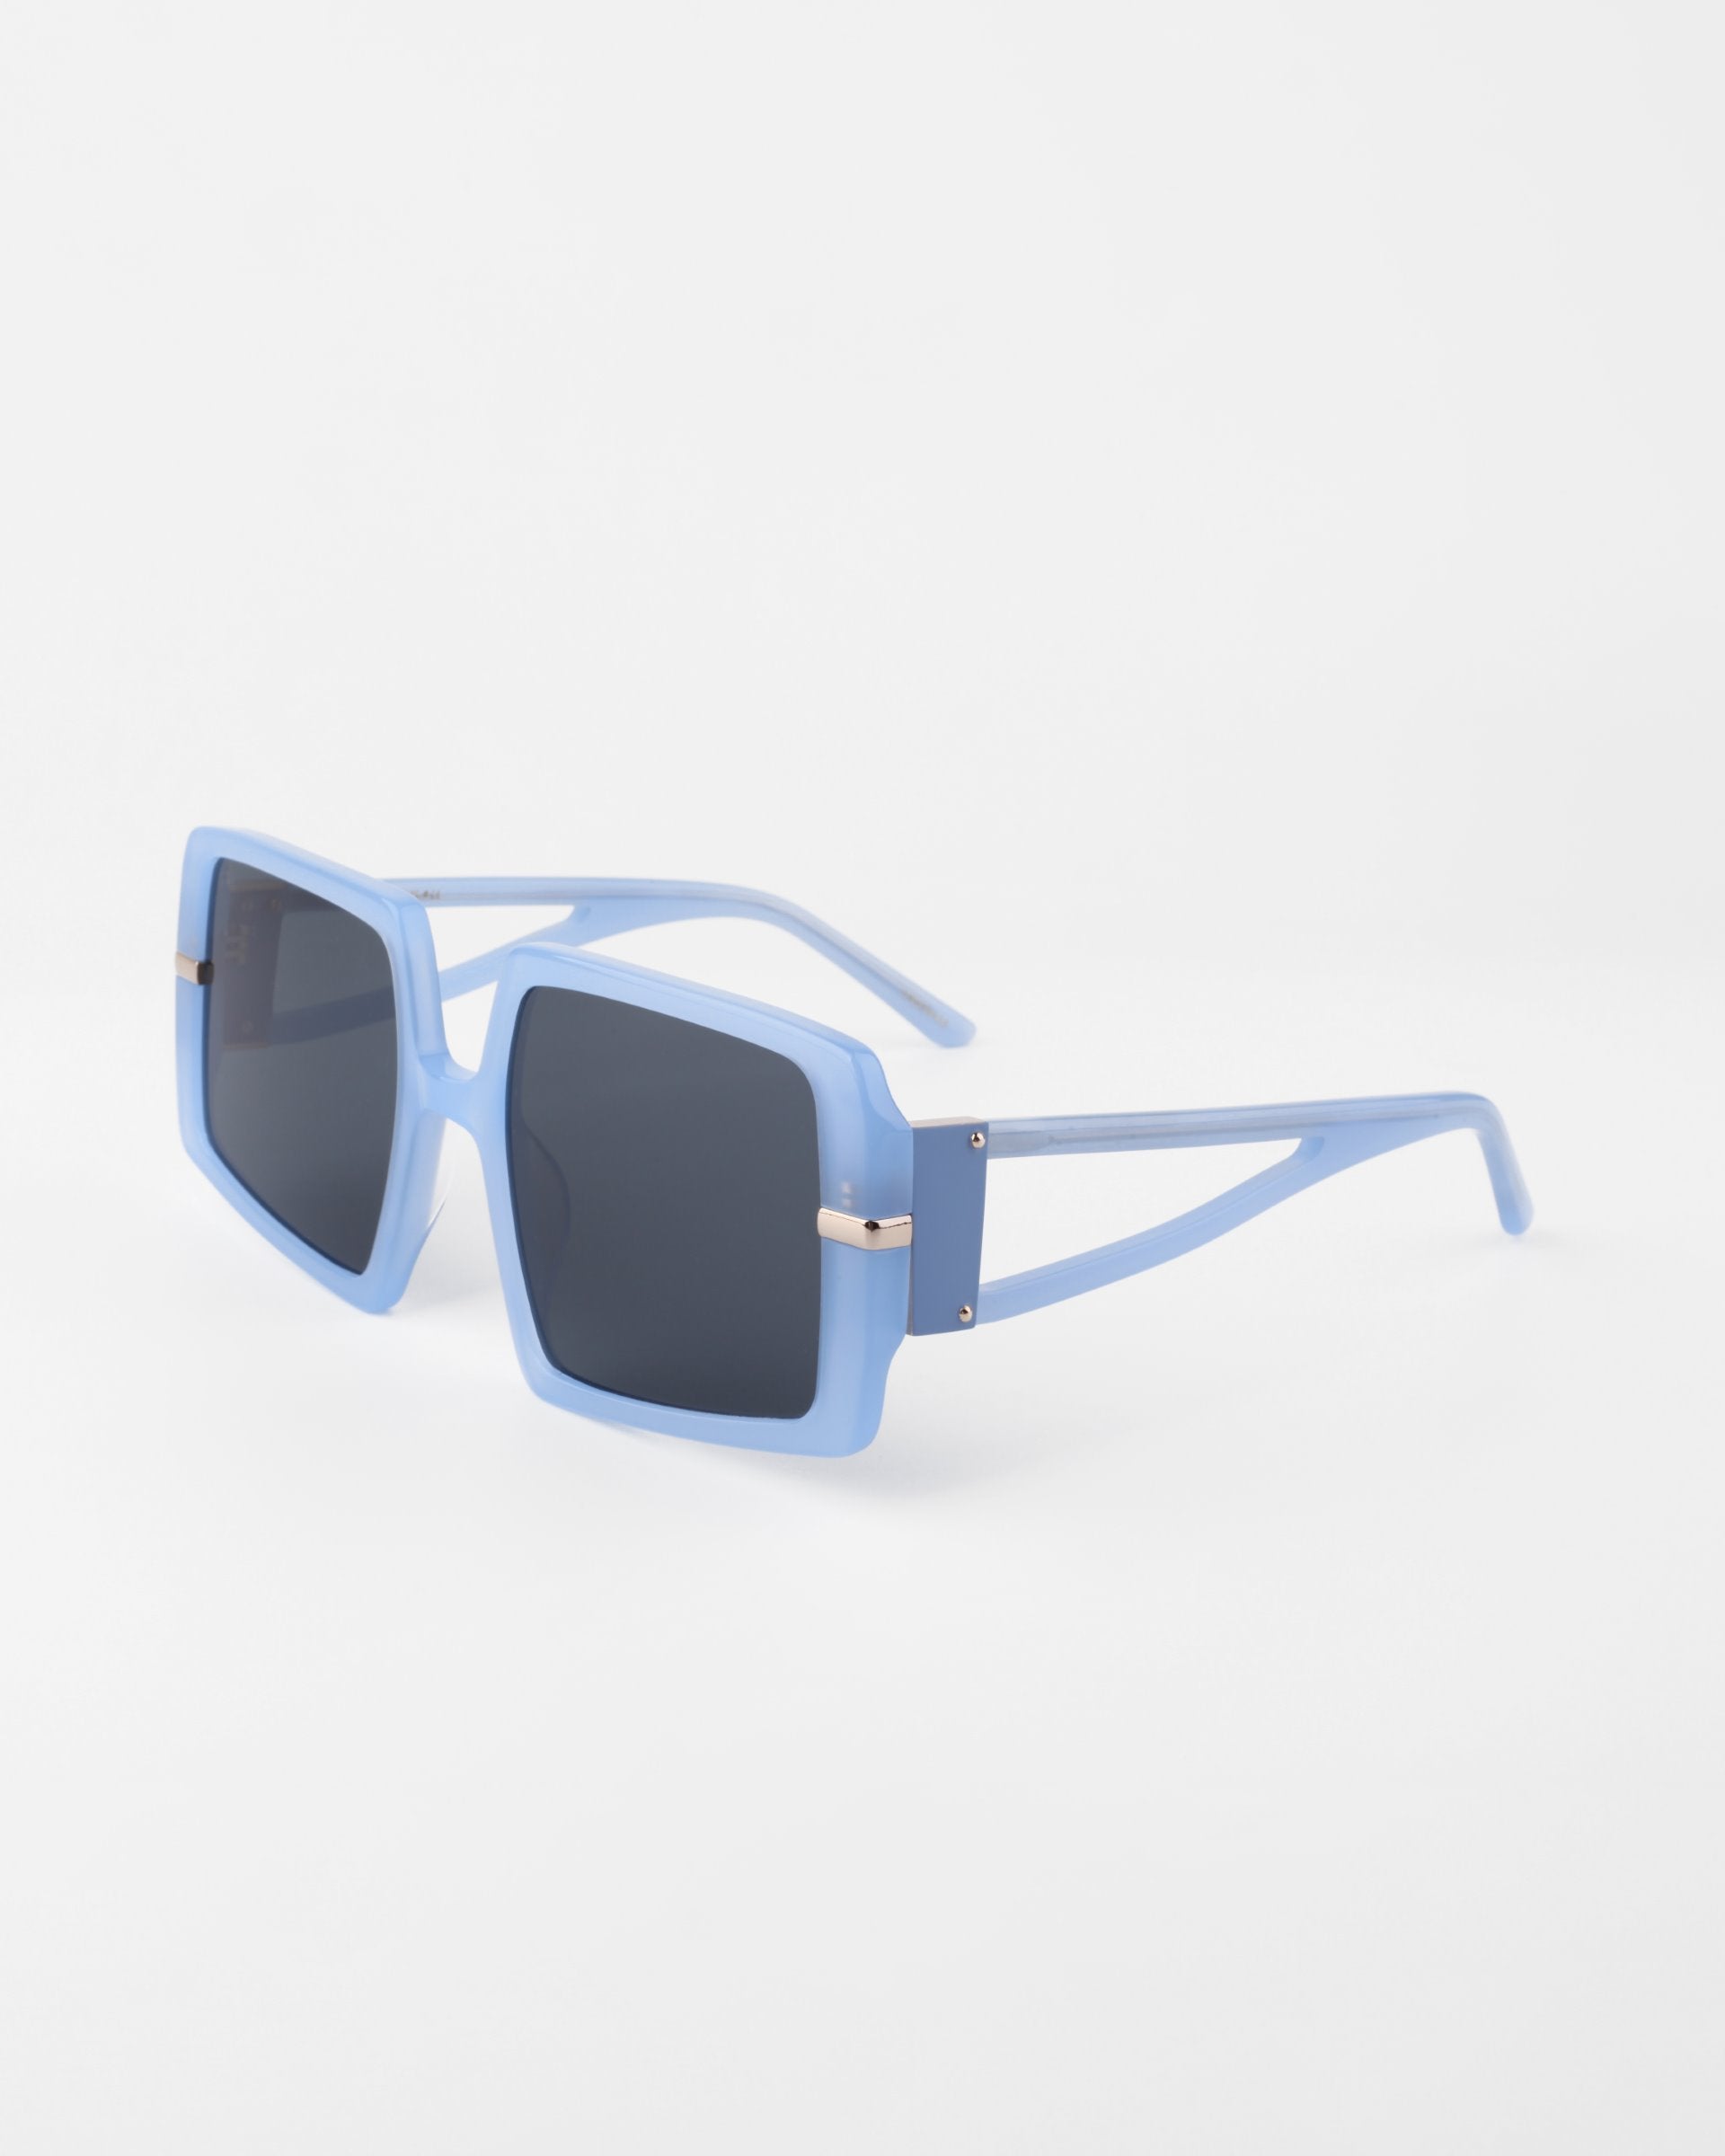 A pair of stylish, square-framed For Art&#39;s Sake® Saturday sunglasses with light blue rims and dark tinted shatter-resistant nylon lenses. The arms of the sunglasses also feature light blue color with a thin, cut-out design near the hinges, which include small metallic accents.